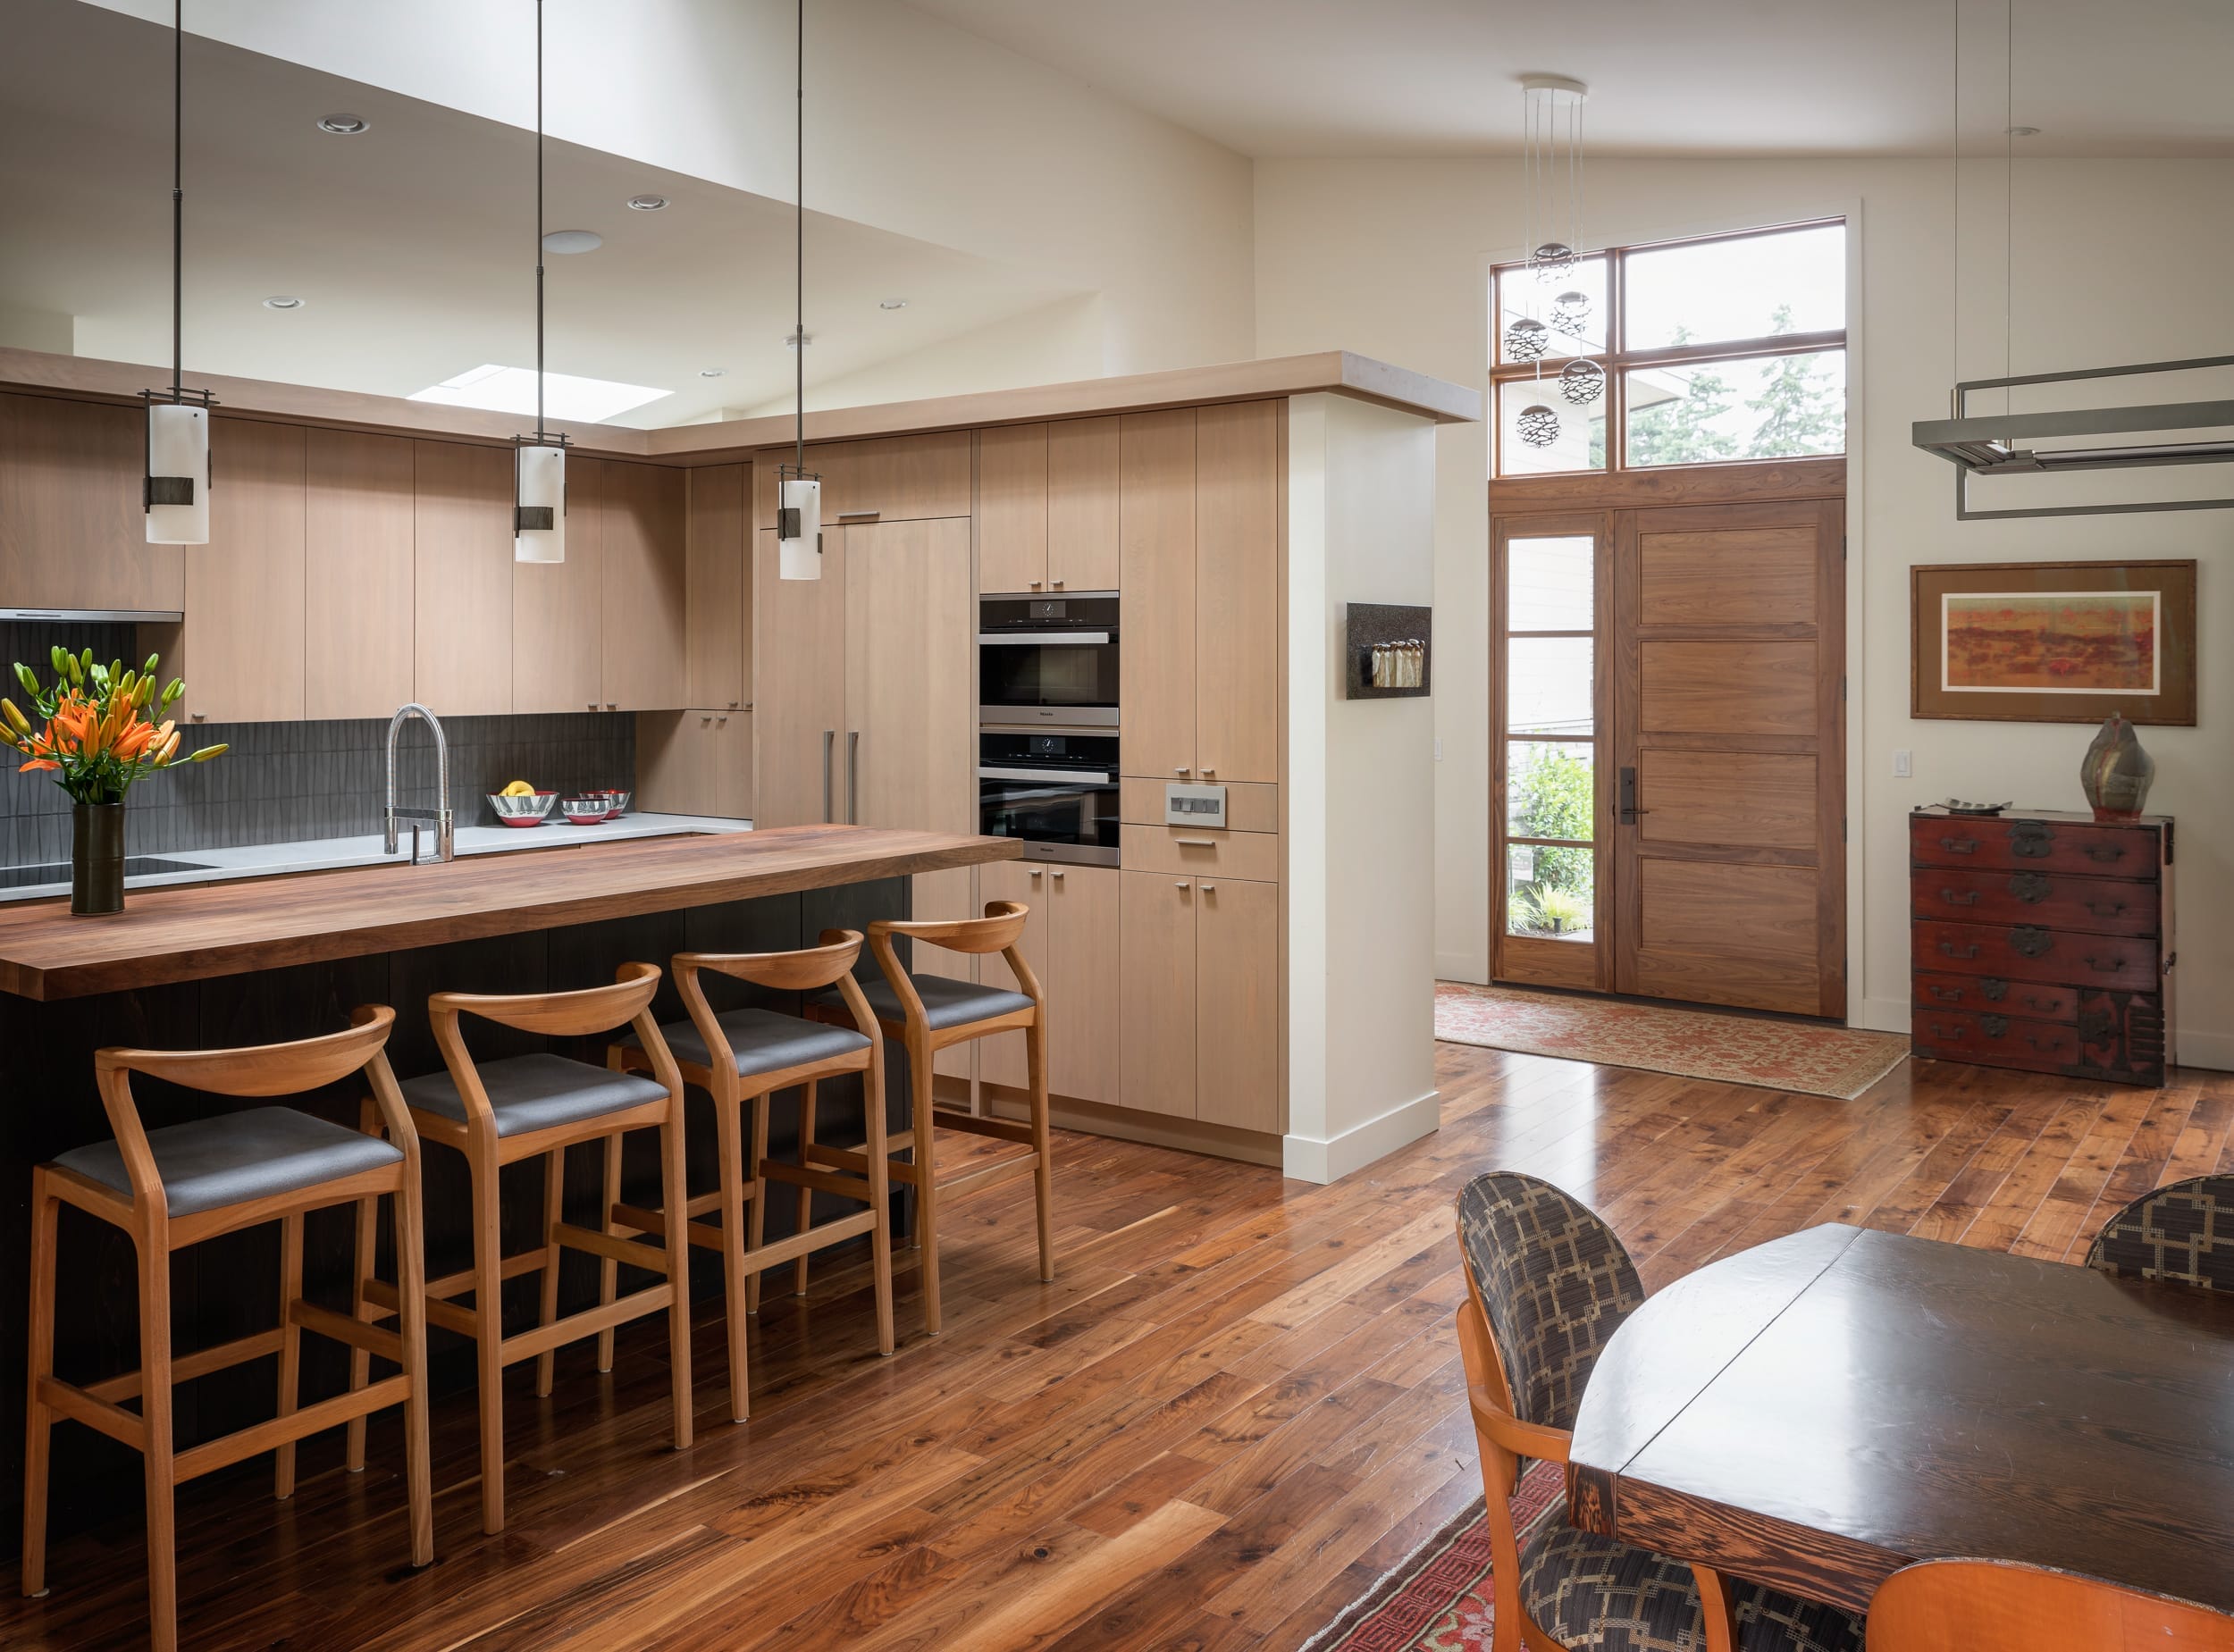 A modern kitchen with wooden floors.